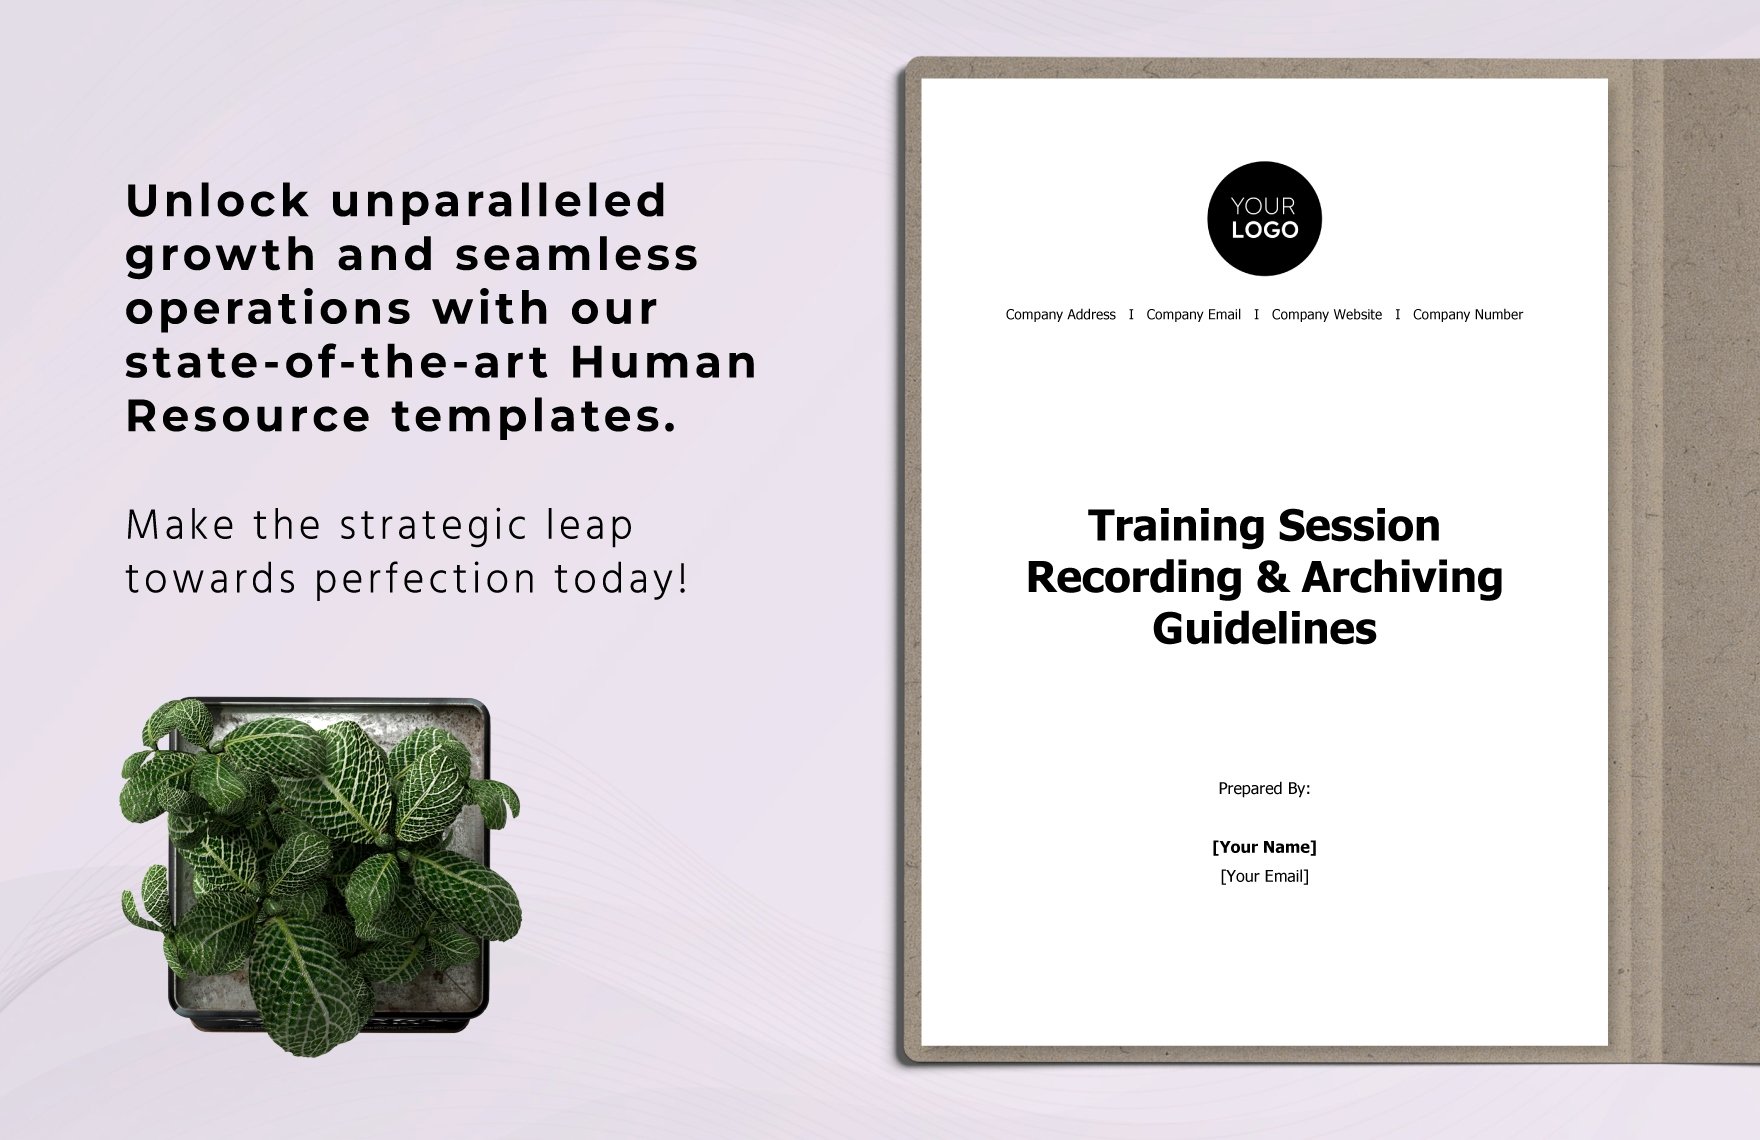 Training Session Recording & Archiving Guidelines HR Template